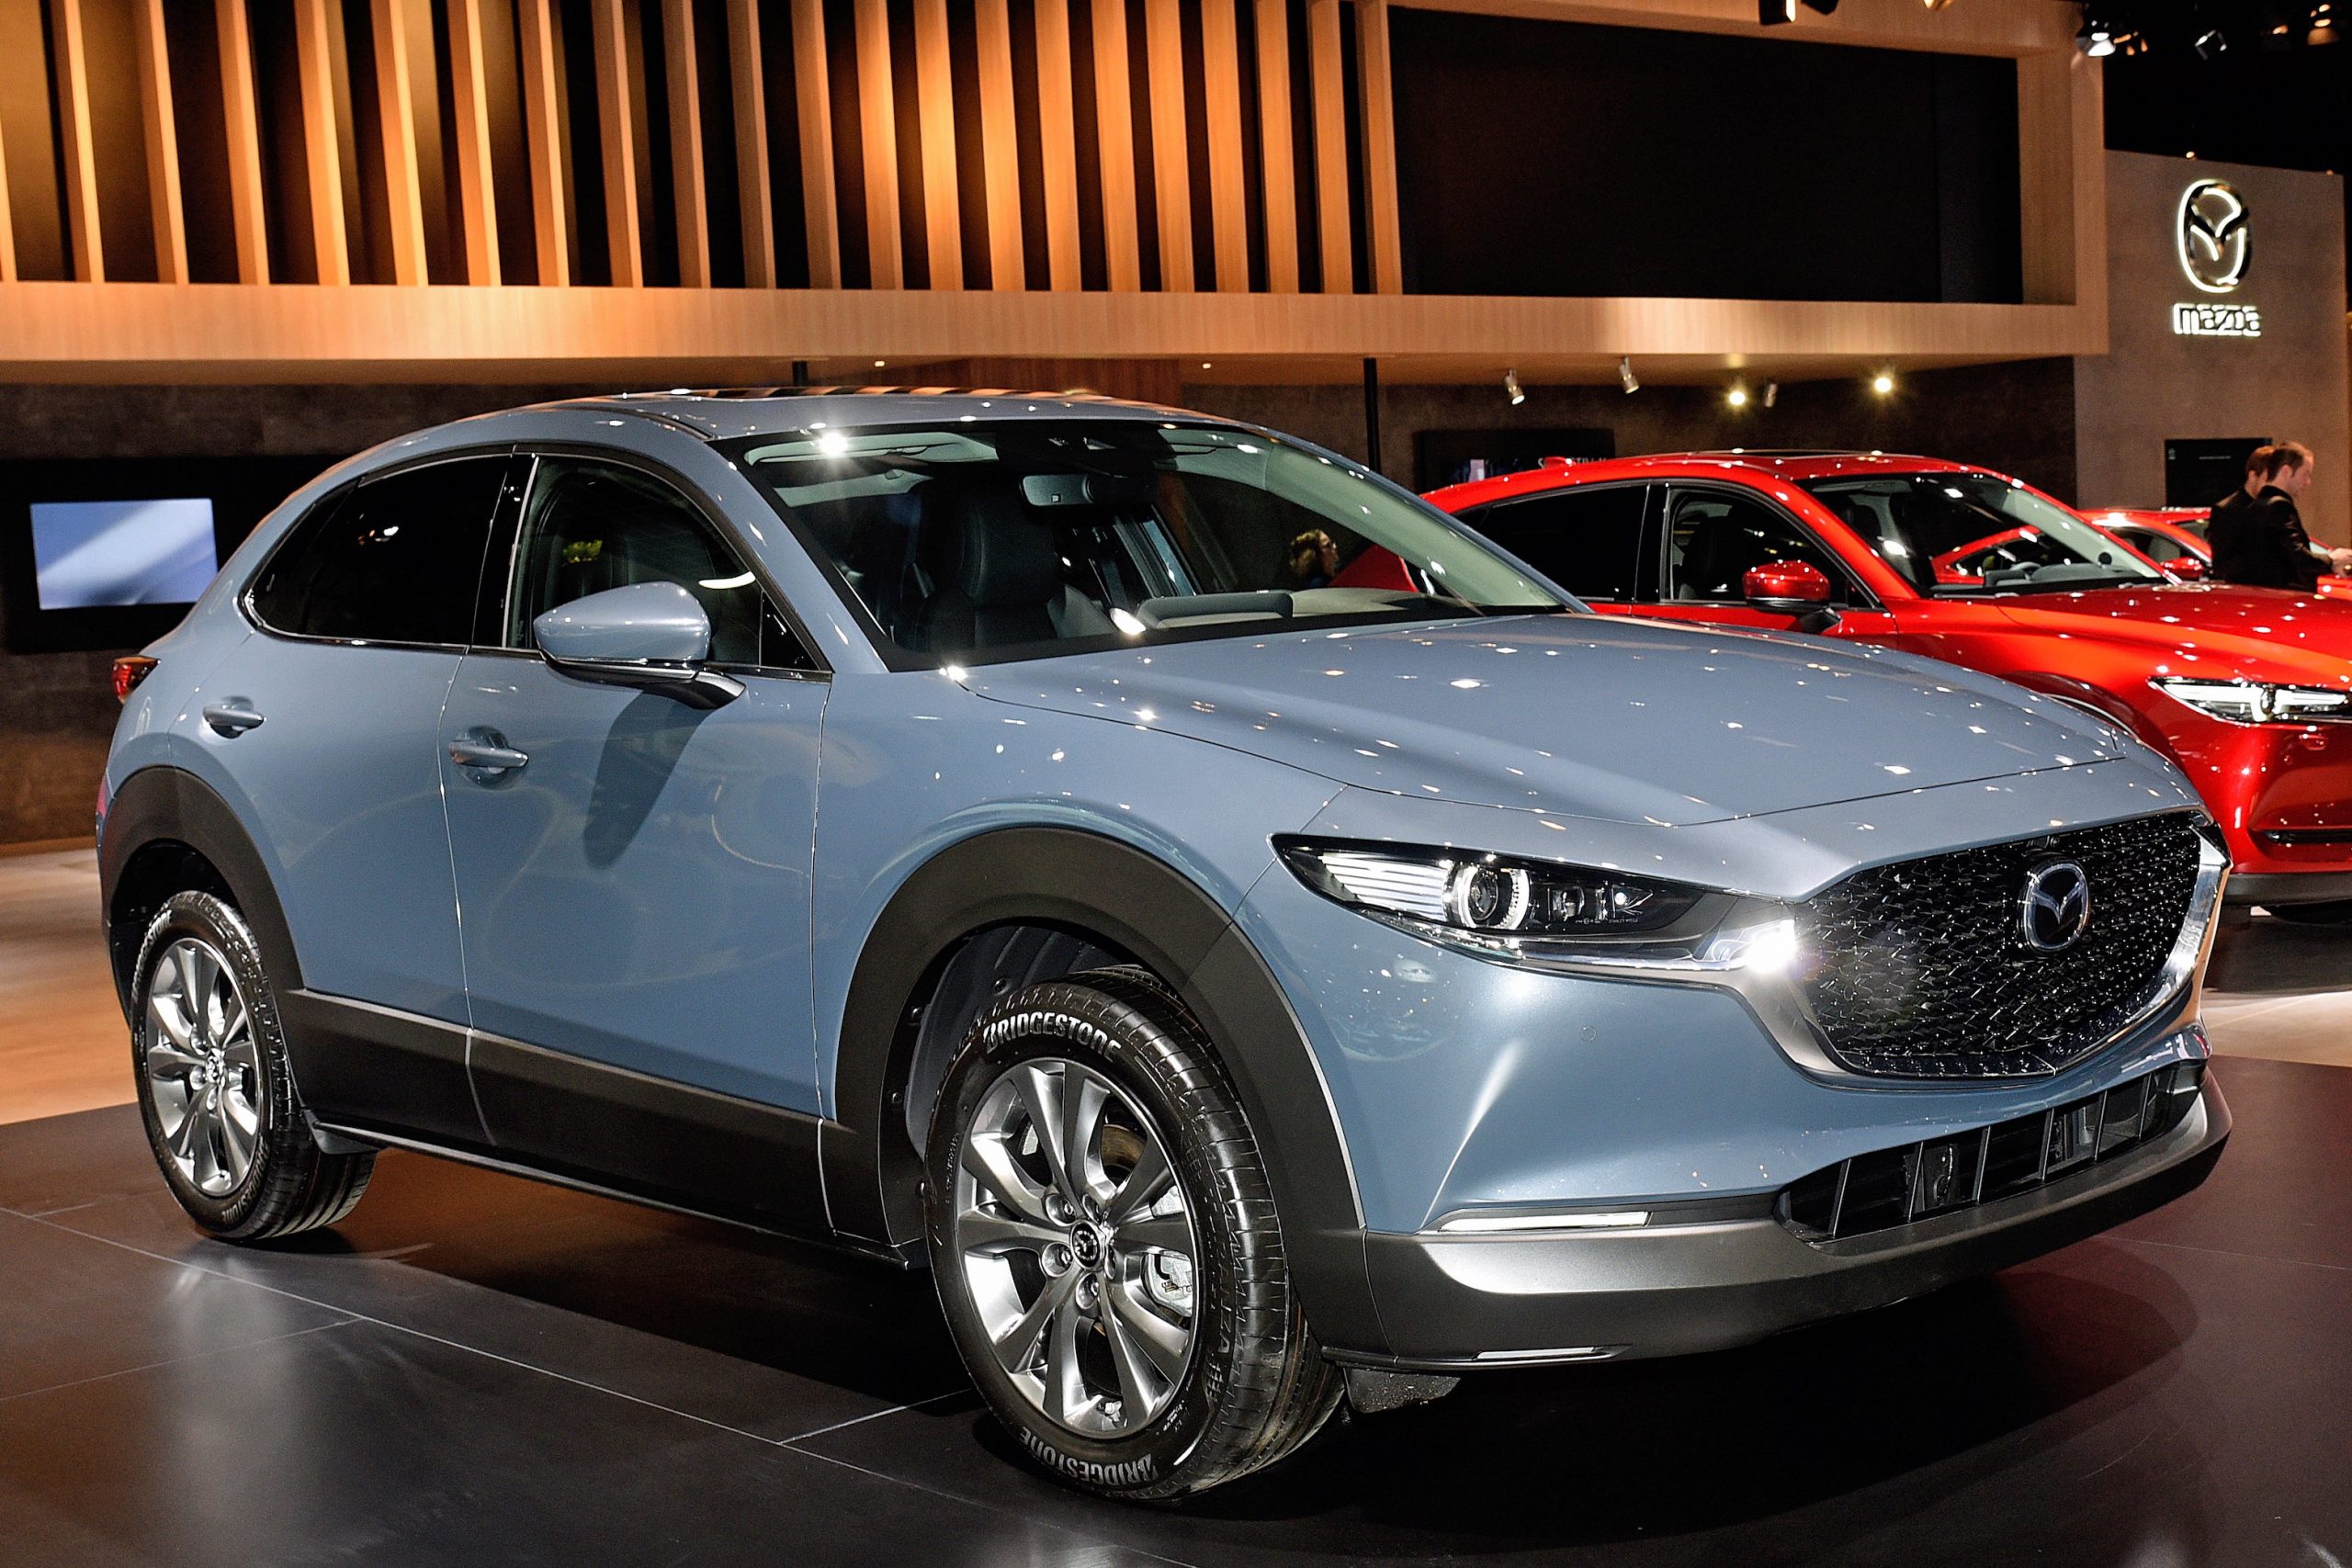 The Mazda CX-30 on display at the Brussels Motor Show